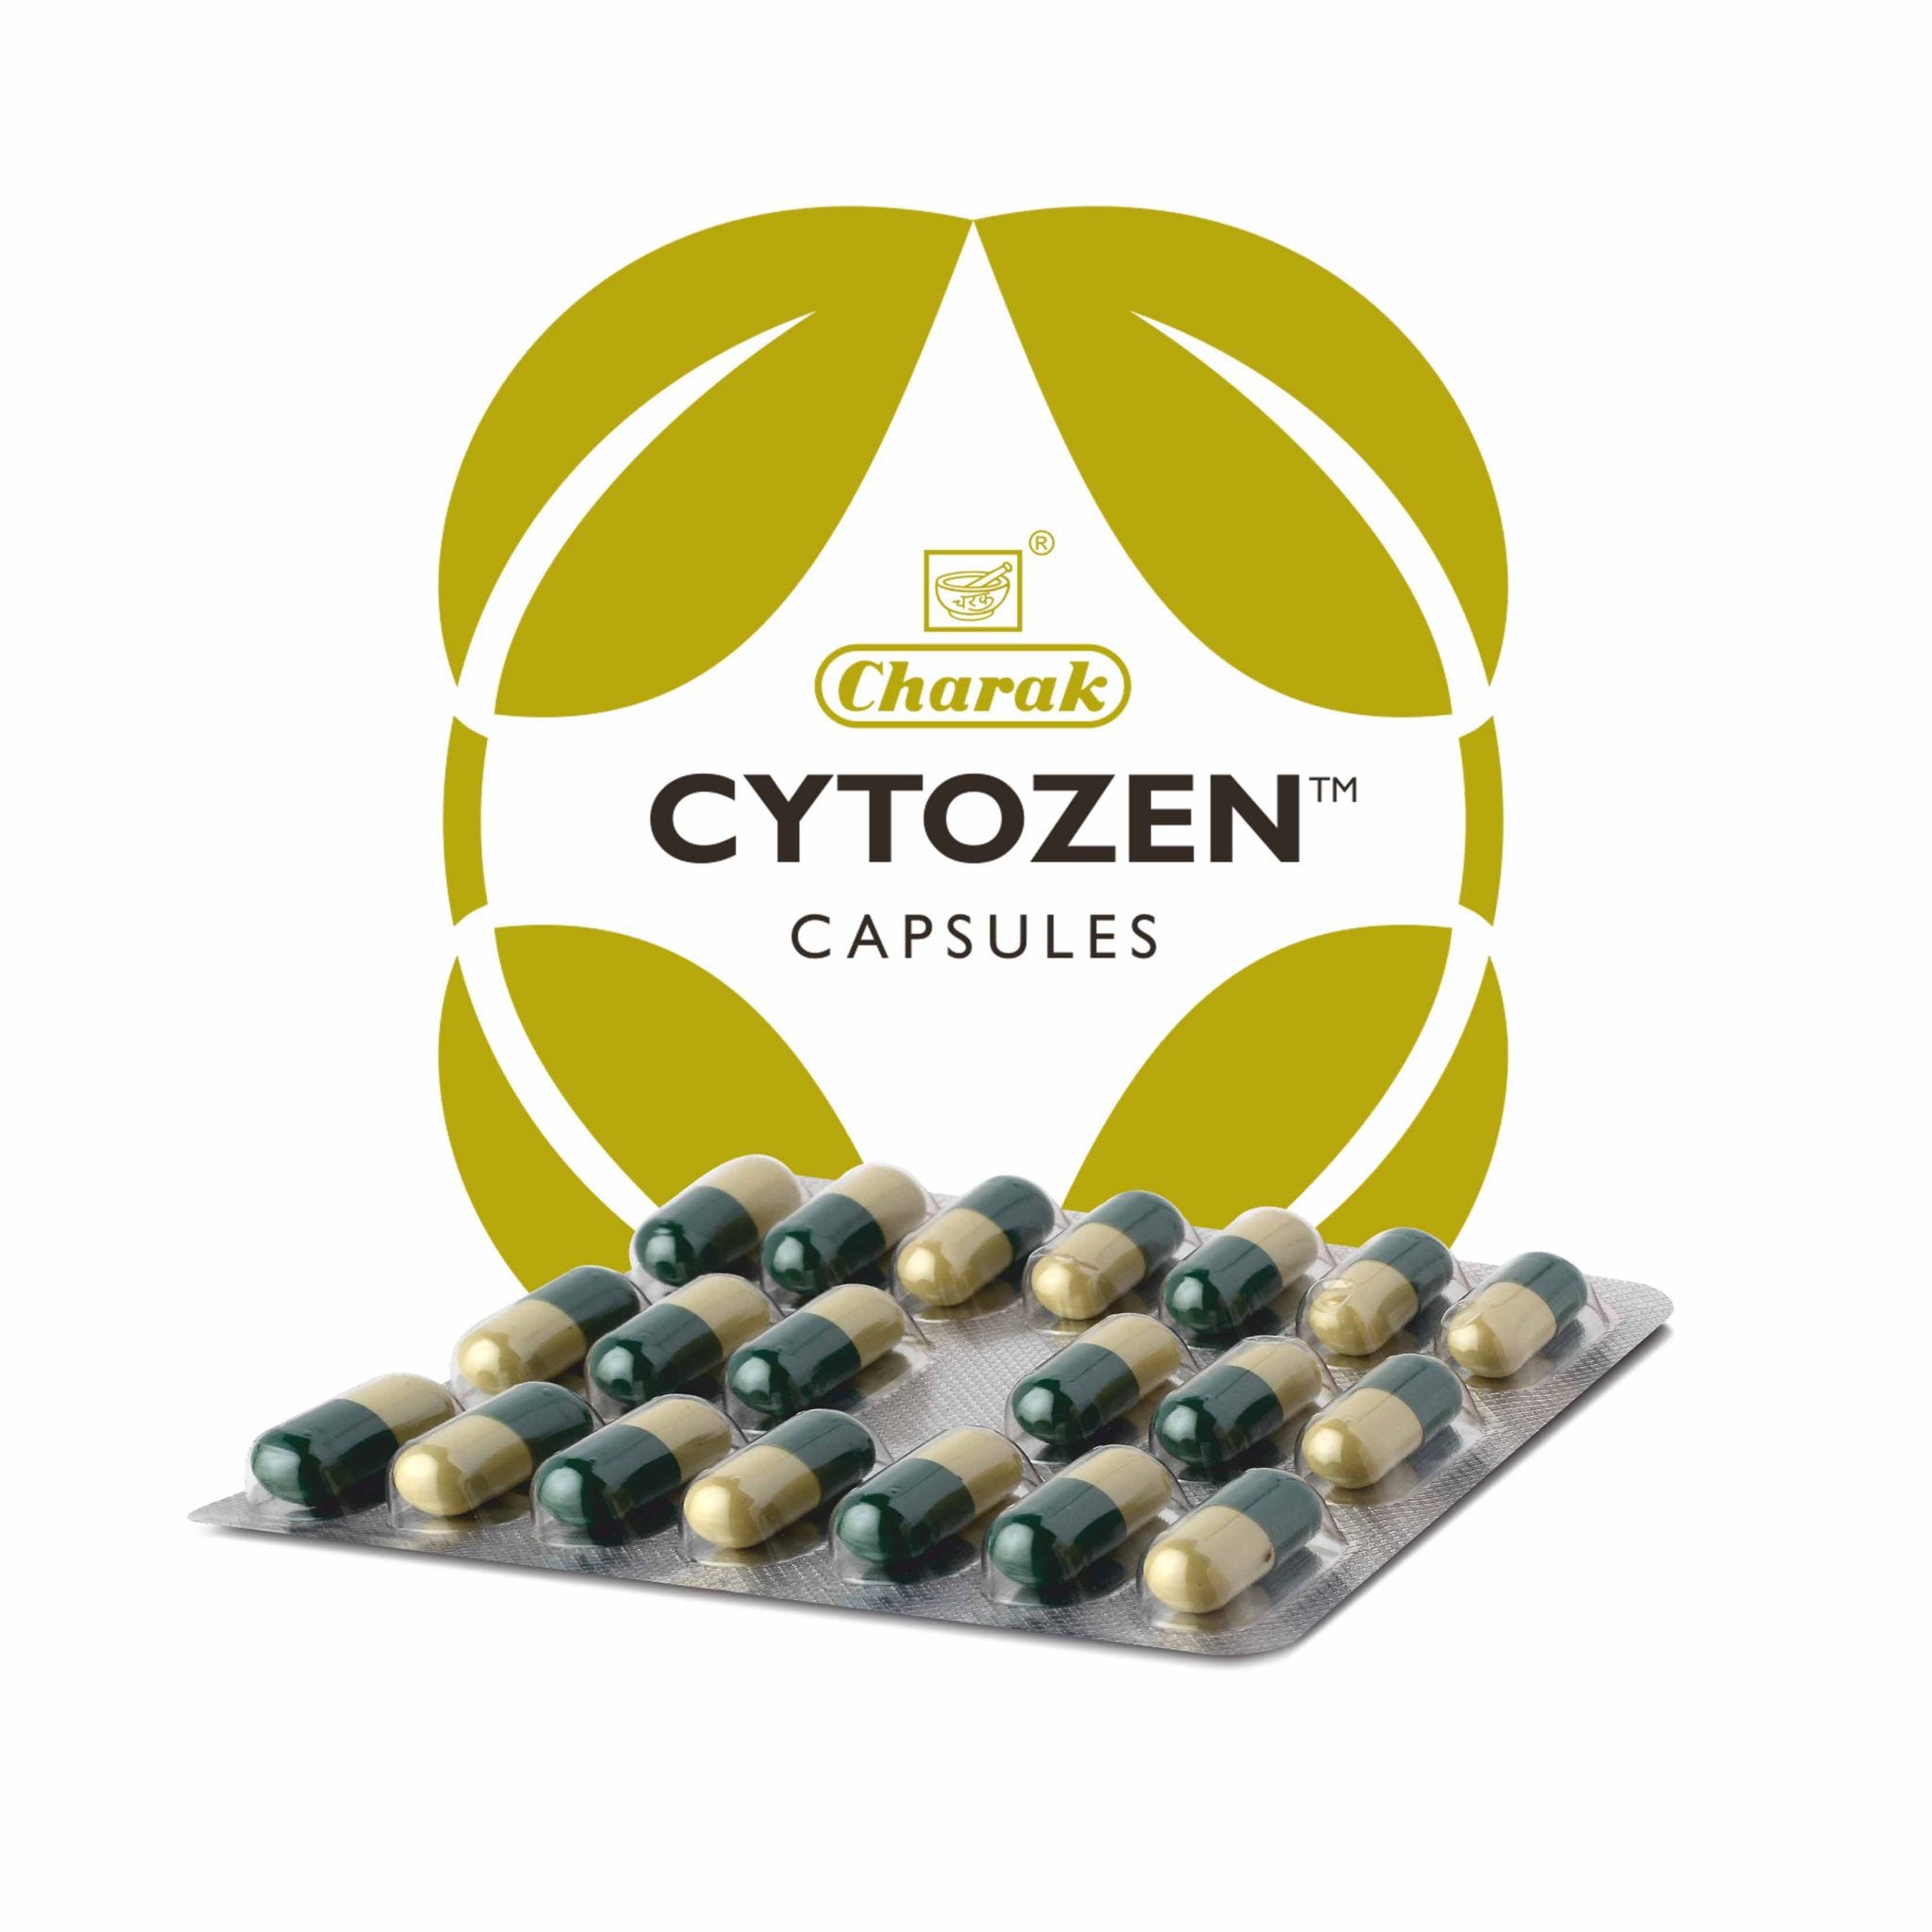 Shop Charak Cytozen 20capsules at price 137.00 from Charak Online - Ayush Care